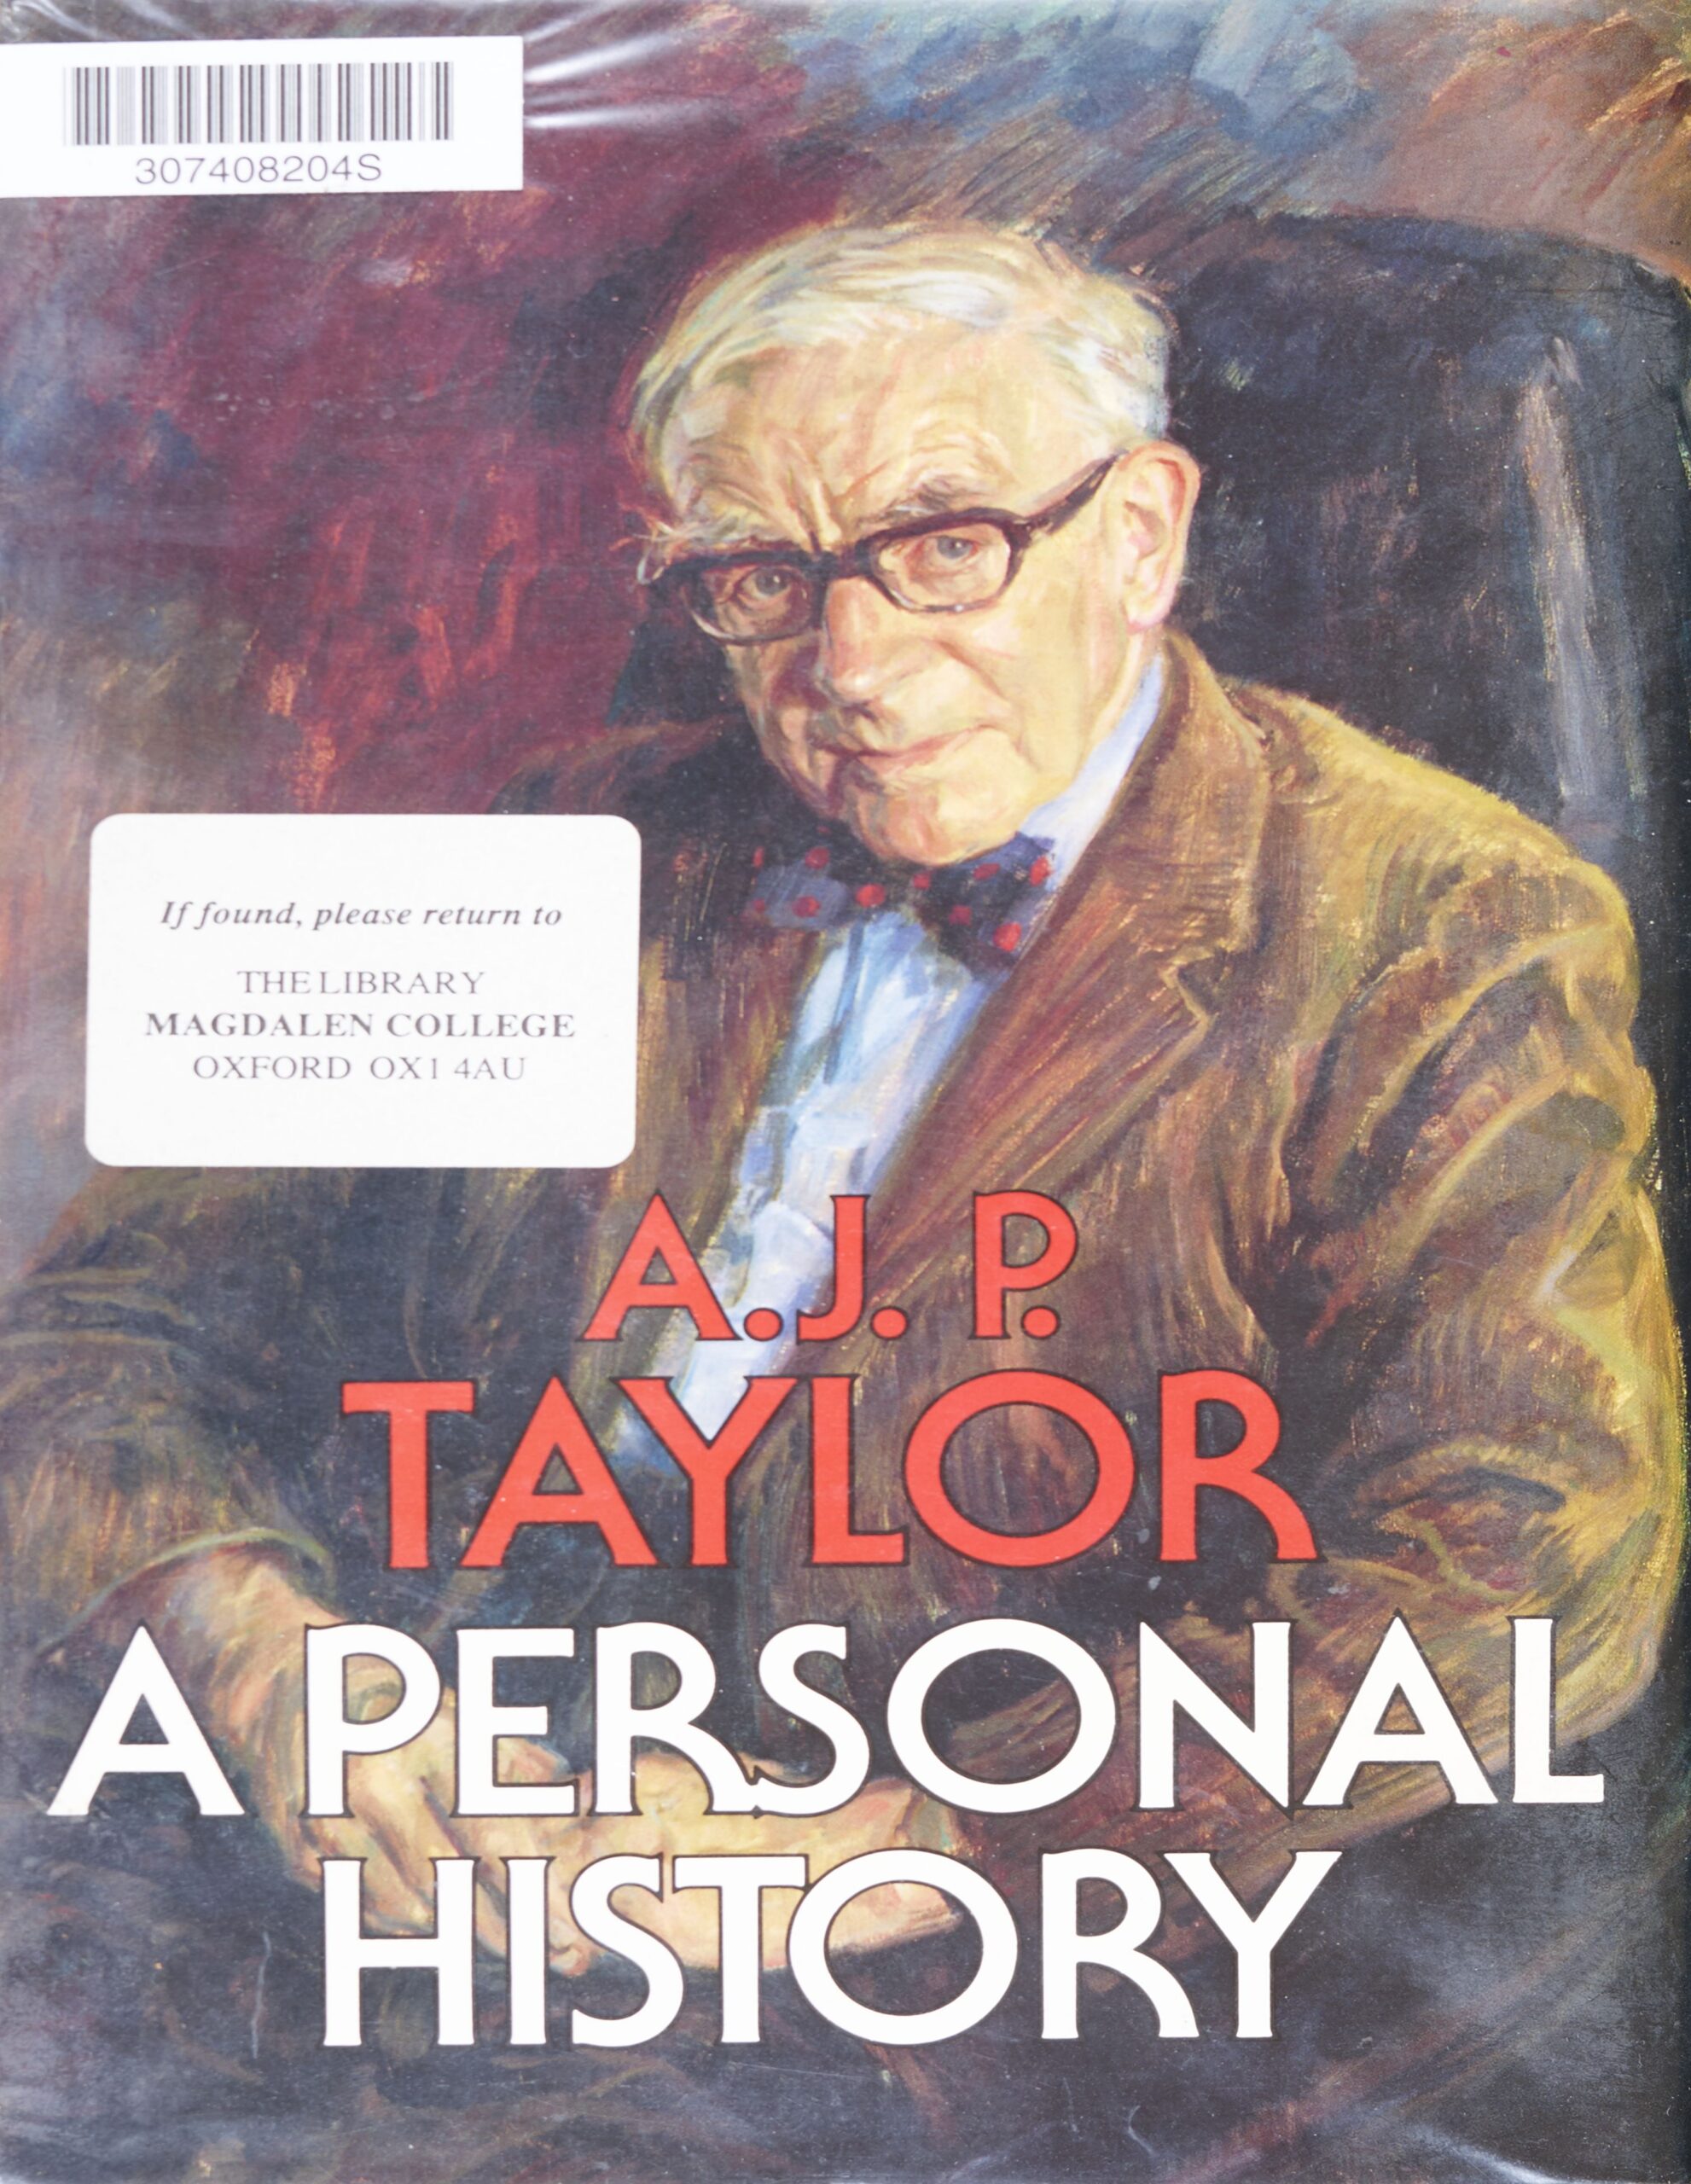 Book cover of A.J.P. Taylor's 'A personal history.' The cover has a painting of the author on it, sitting in an arm chair holding his hands together on his lap. He is wearing a suit with one of his trademark bow ties.